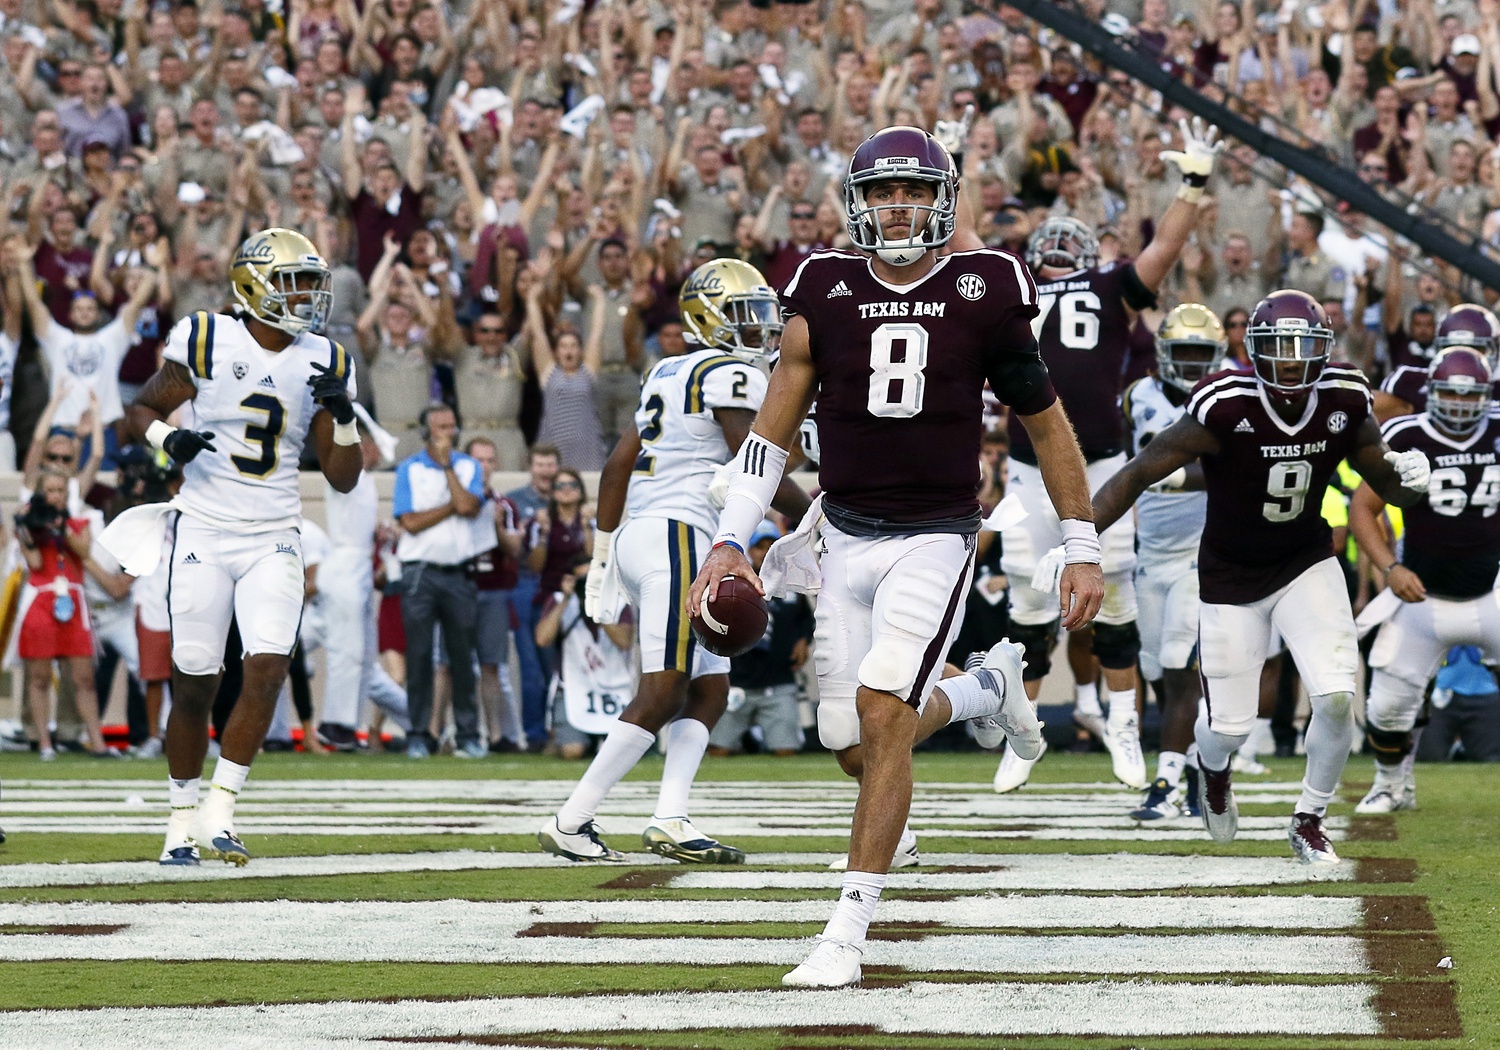 Sep 3, 2016; College Station, TX, USA; Texas A&M Aggies quarterback Trevor Knight (8) goes in for the one-yard touchdown run in overtime against the UCLA Bruins. Texas A&M won 31-24. Mandatory Credit: Ray Carlin-USA TODAY Sports